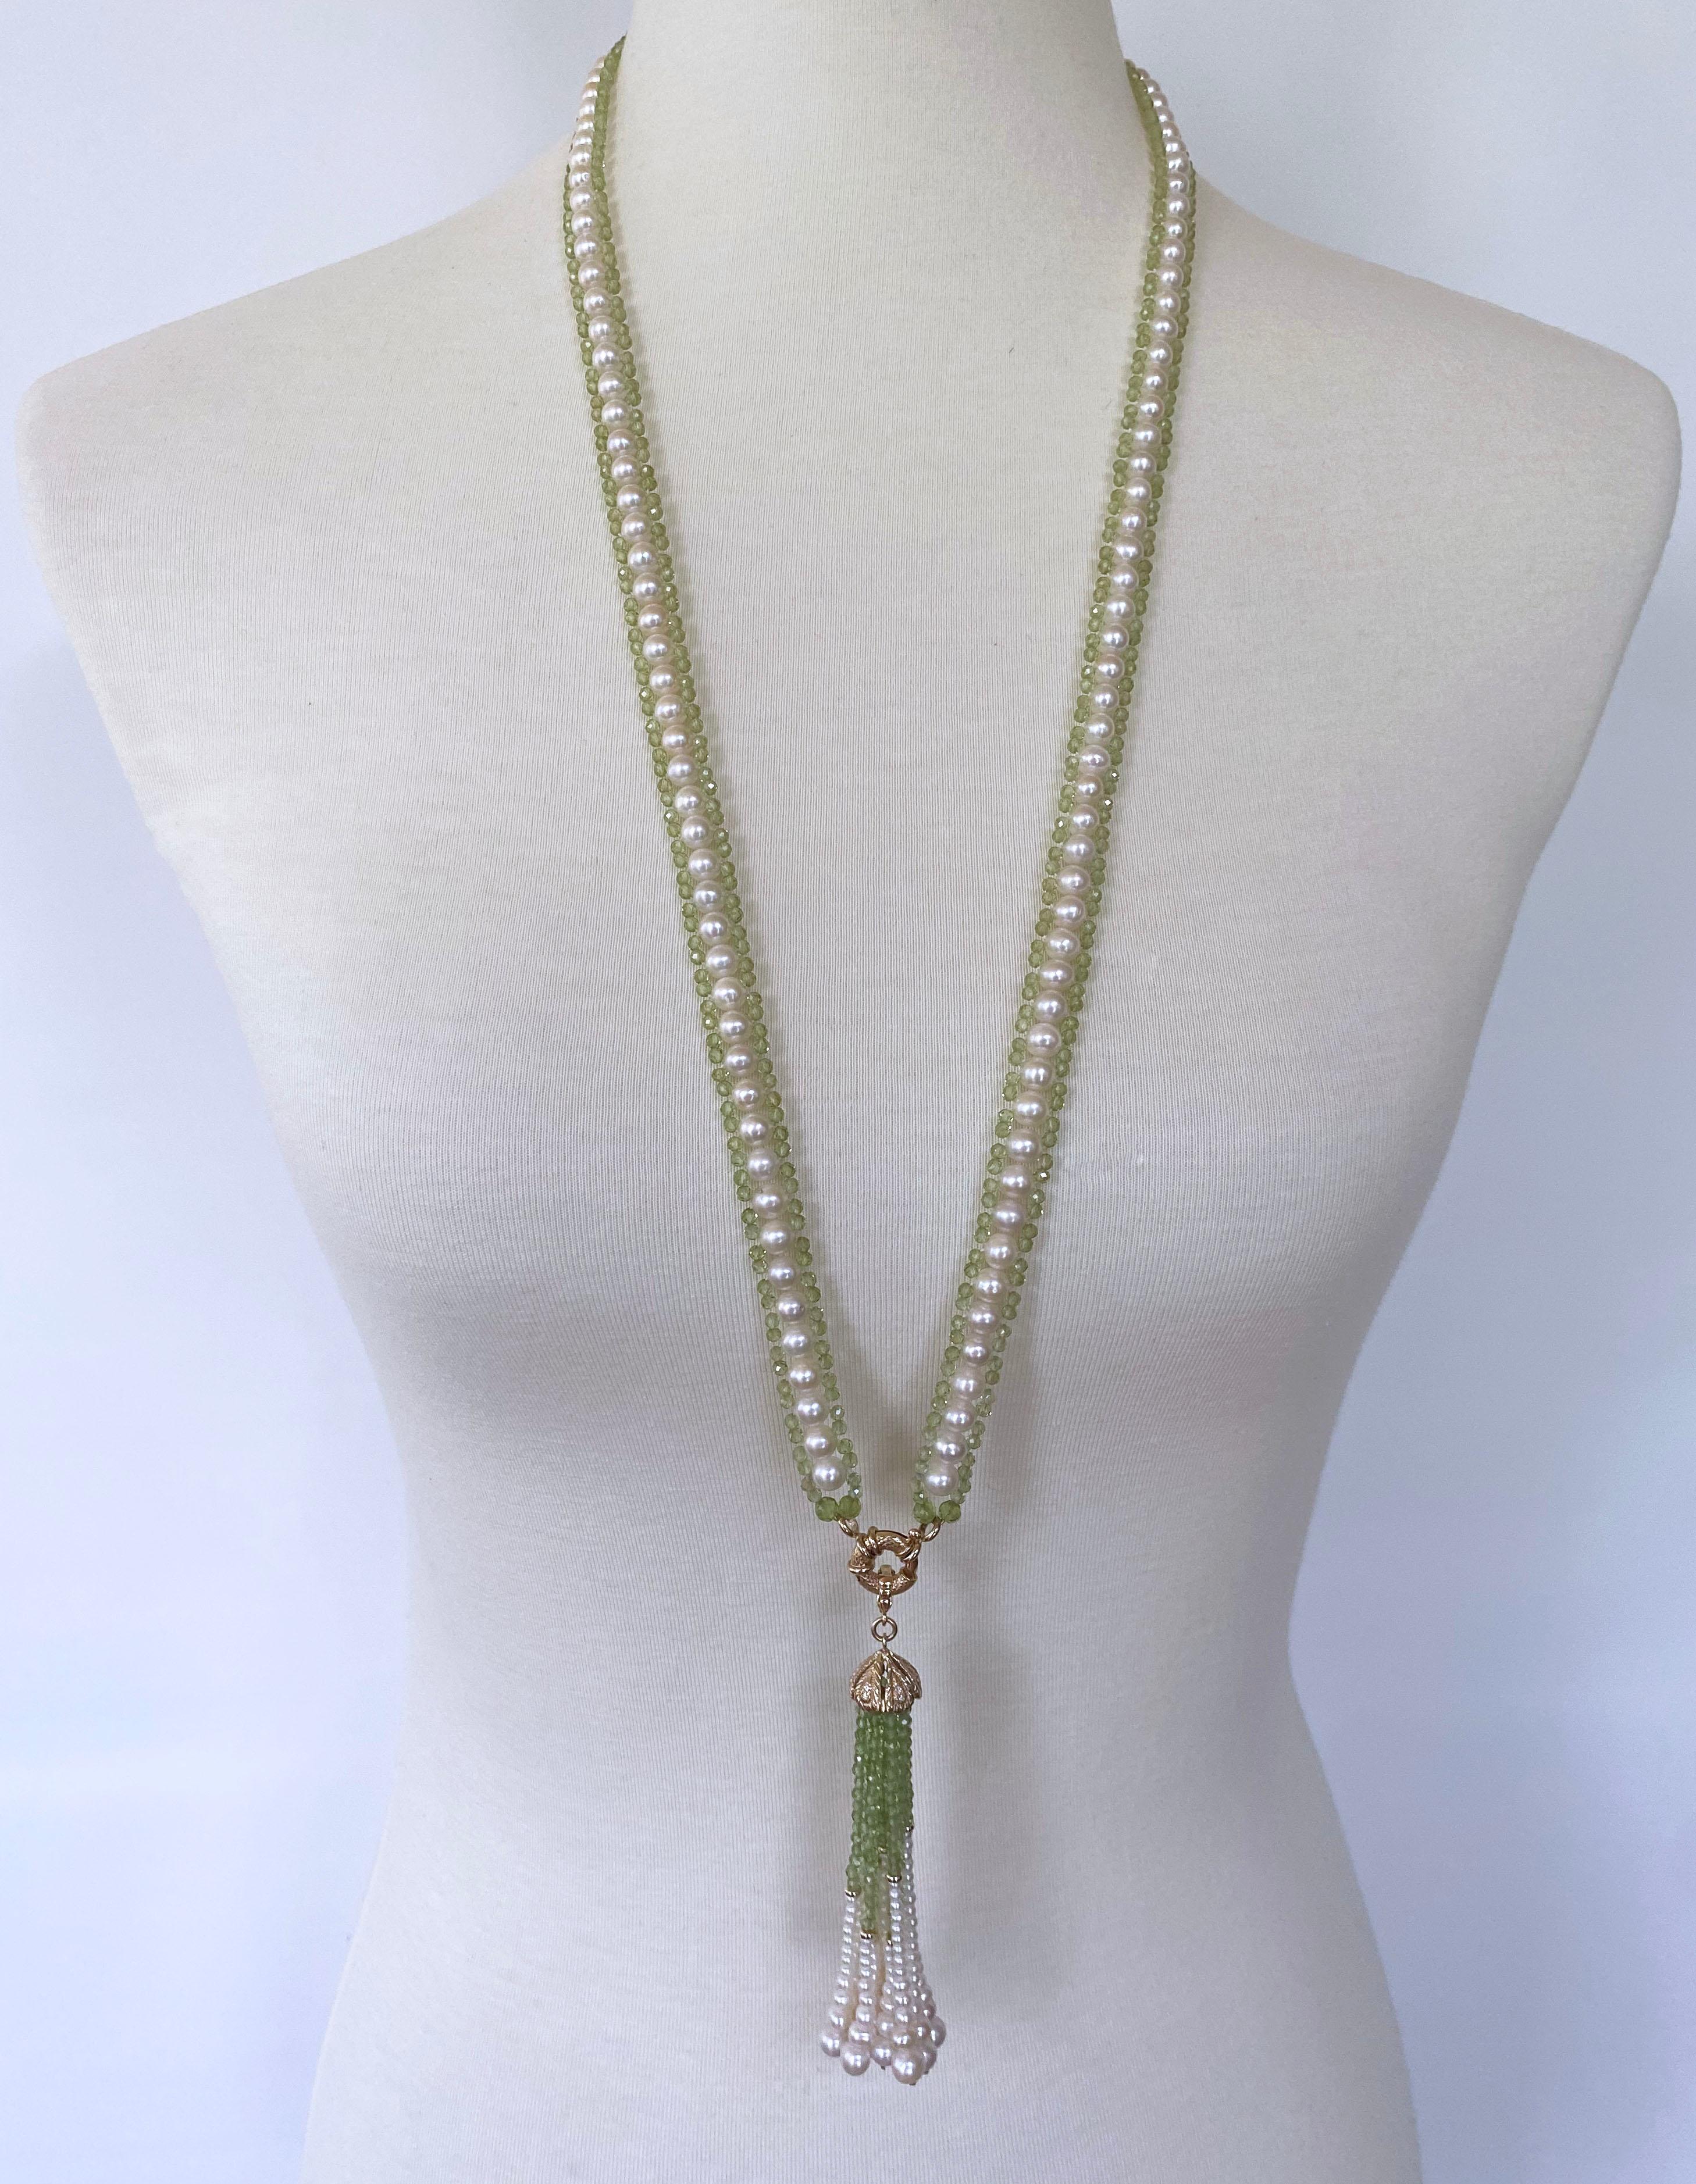 Beautiful piece by Marina J. This piece was created using all Cultured White Pearls woven together with gorgeous Faceted Peridot beads. The Peridot beads display a vibrant Spring Green color whose translucency radiates when hit with light. Measuring